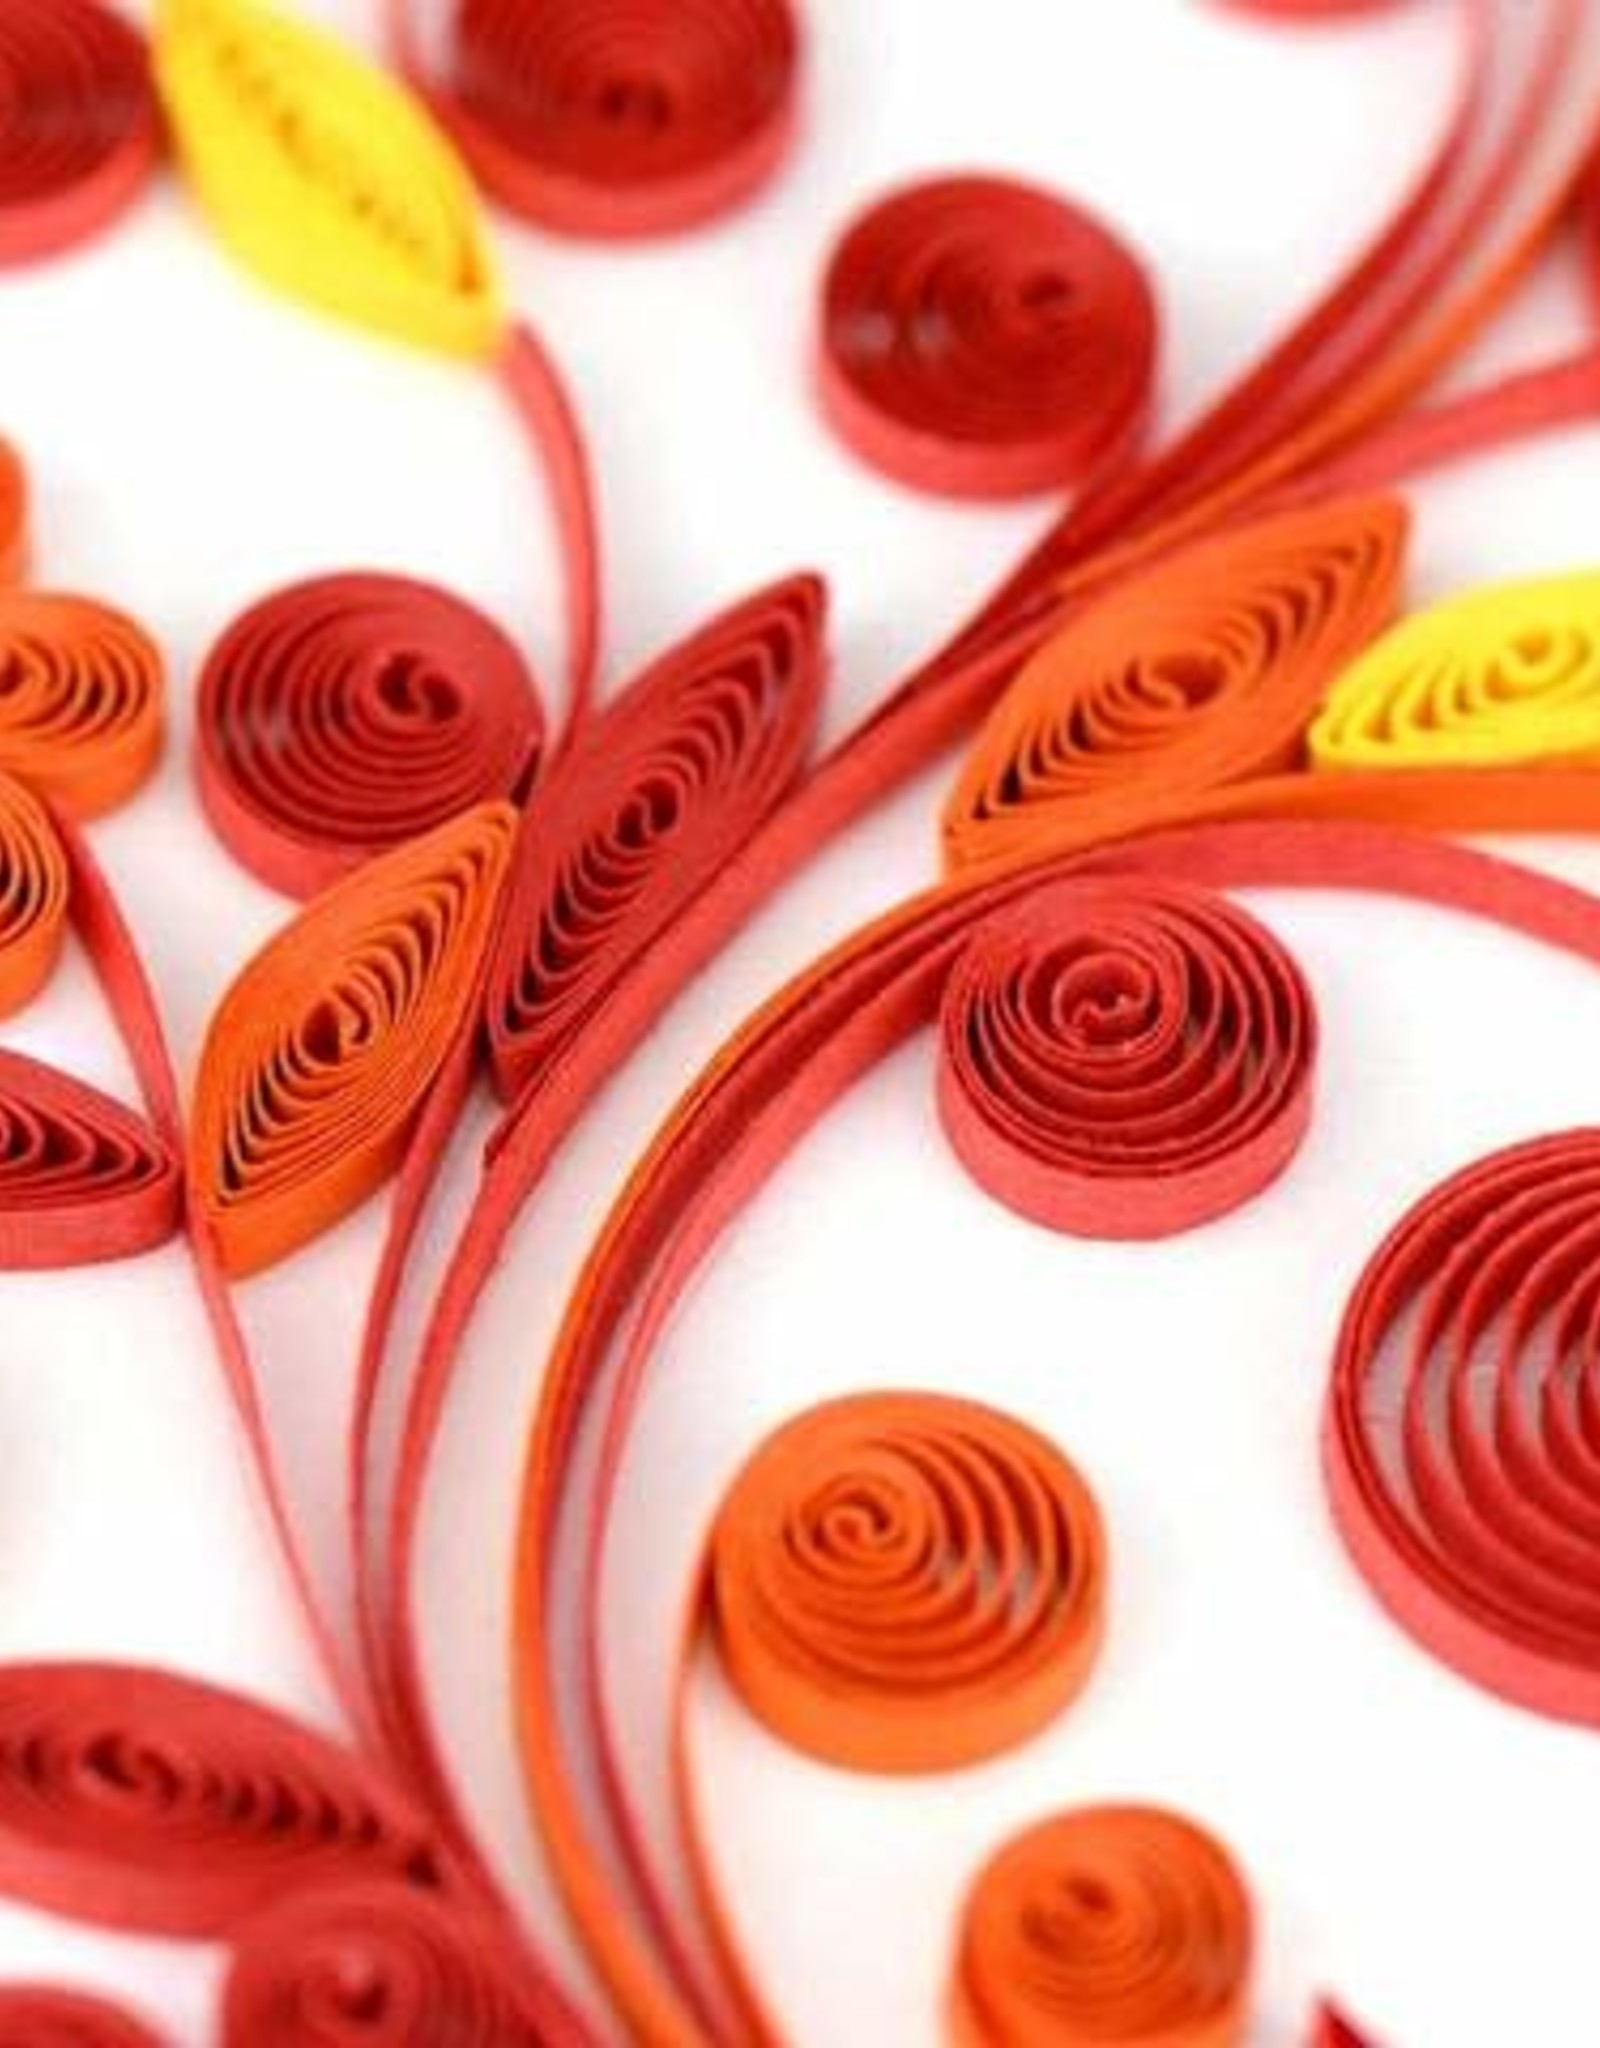 Quilling Card Quilled Heart Greeting Card